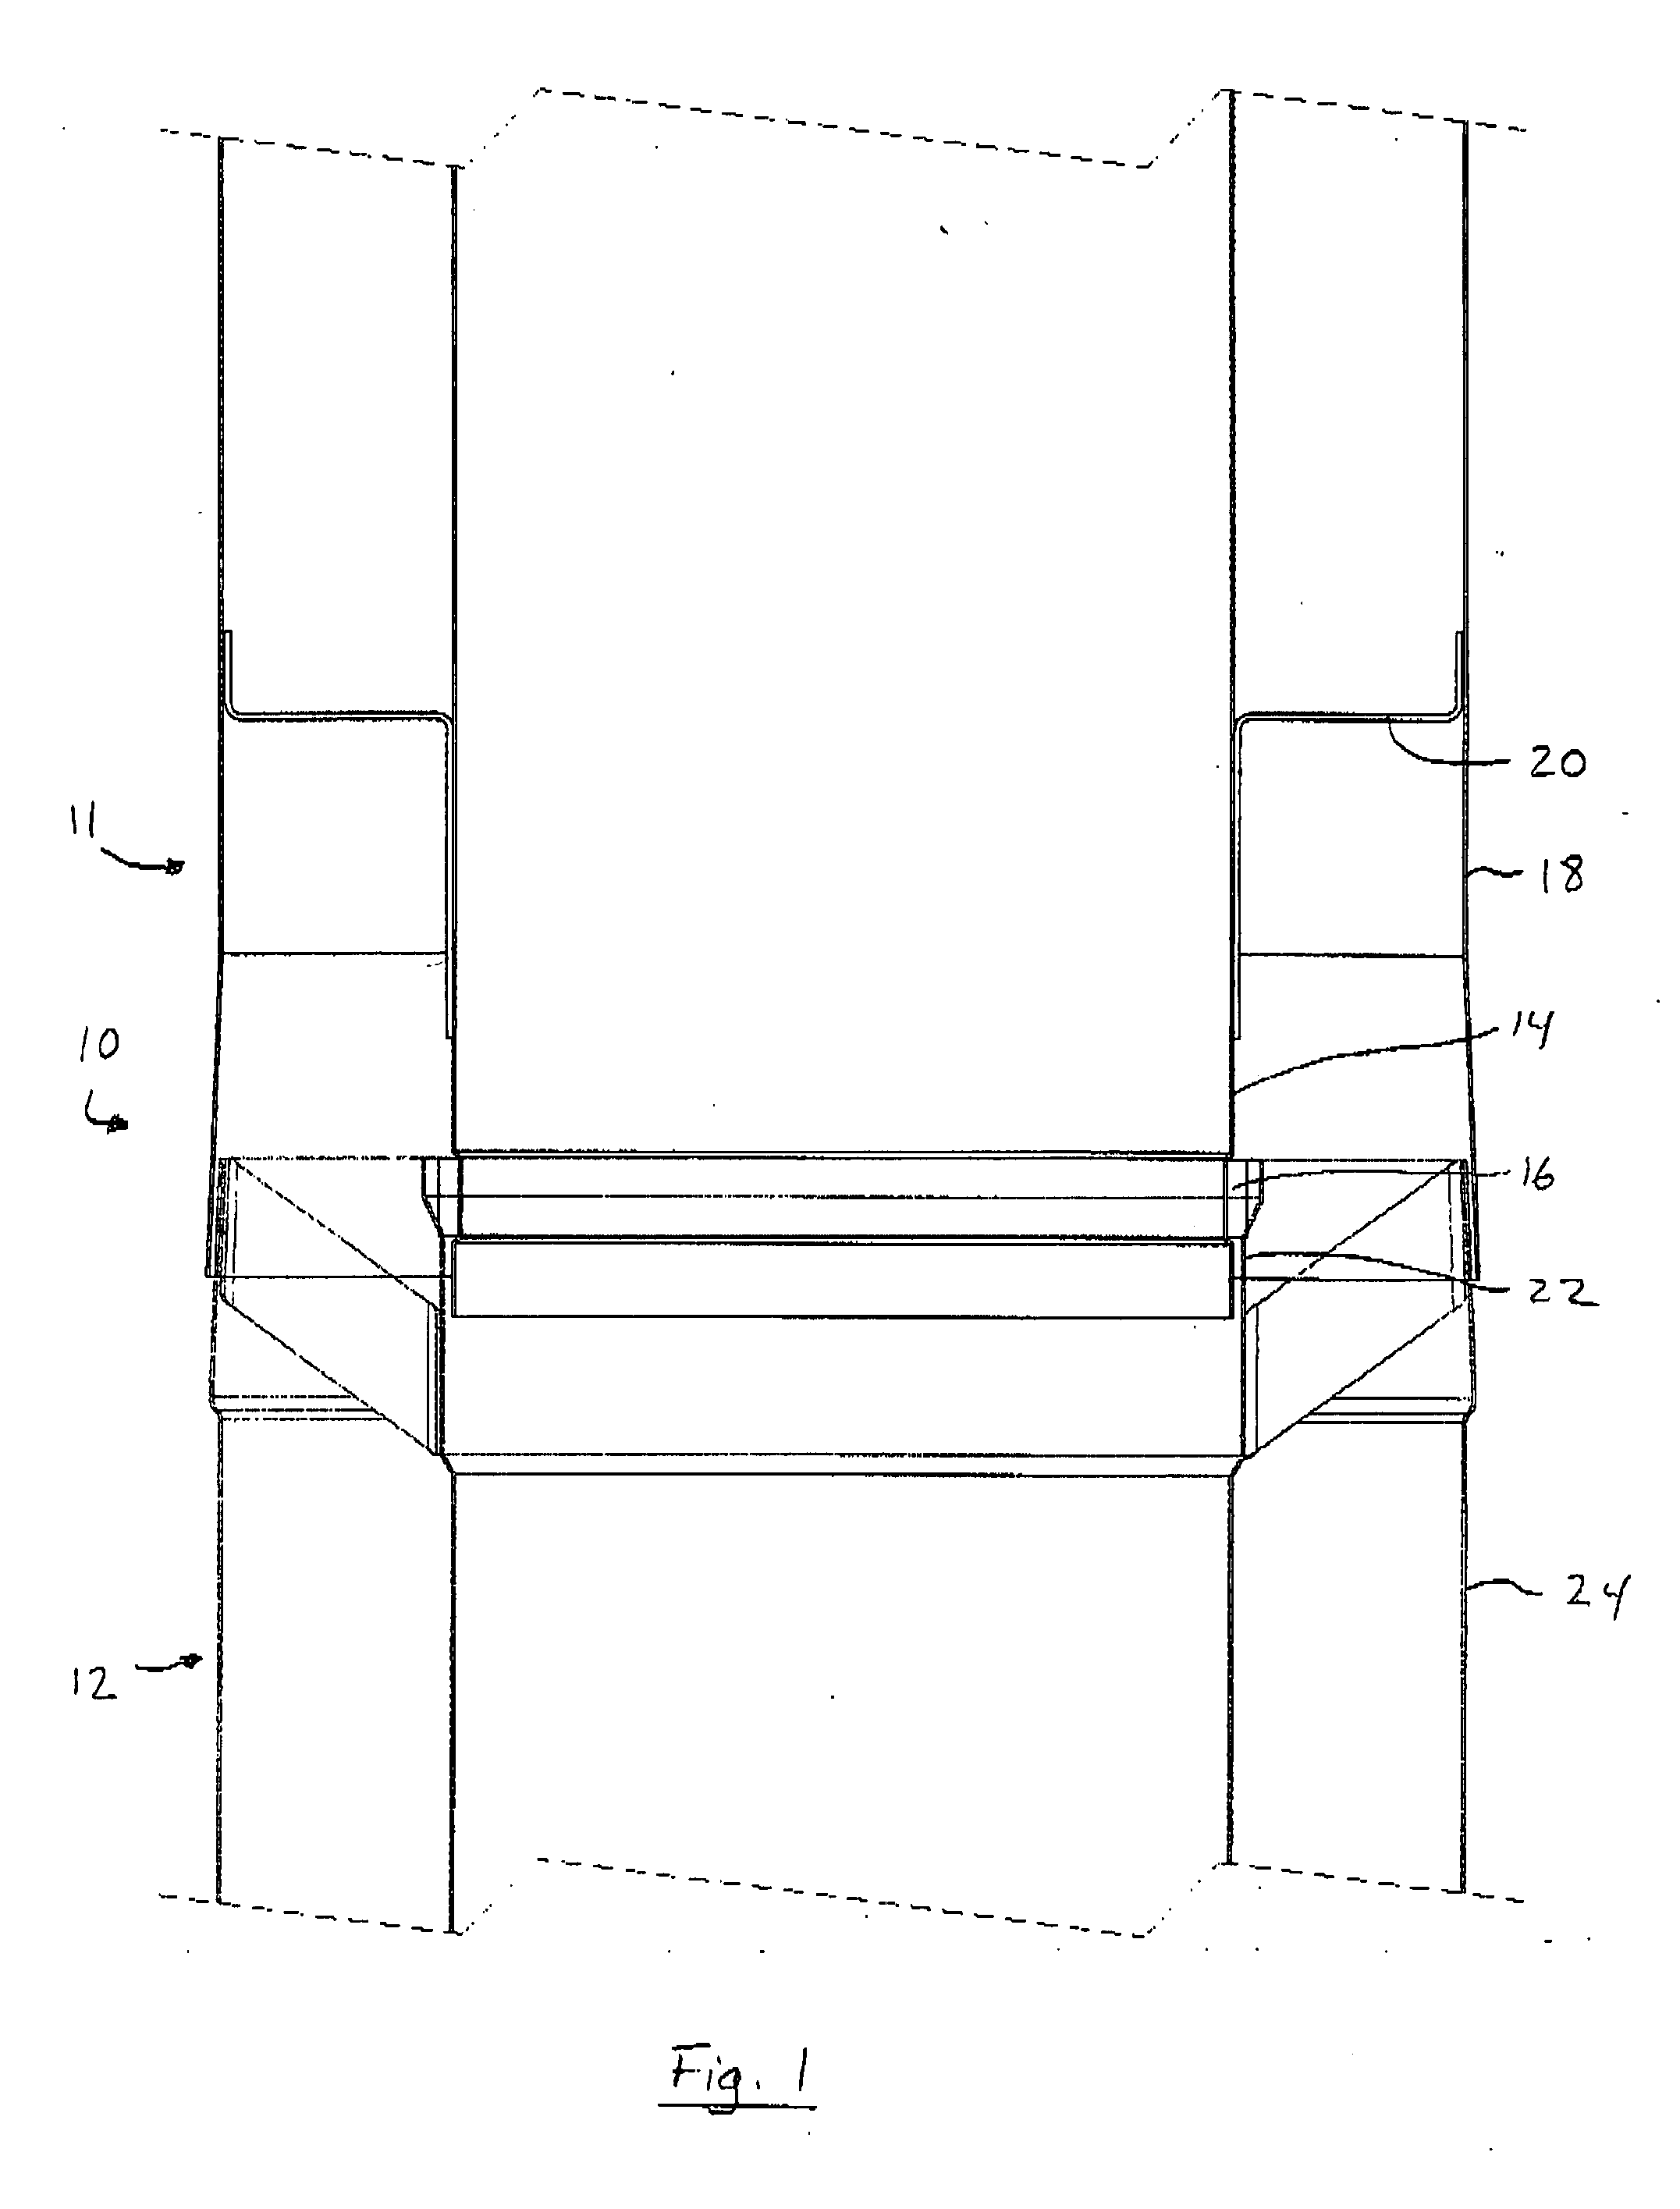 Coupling for direct venting system